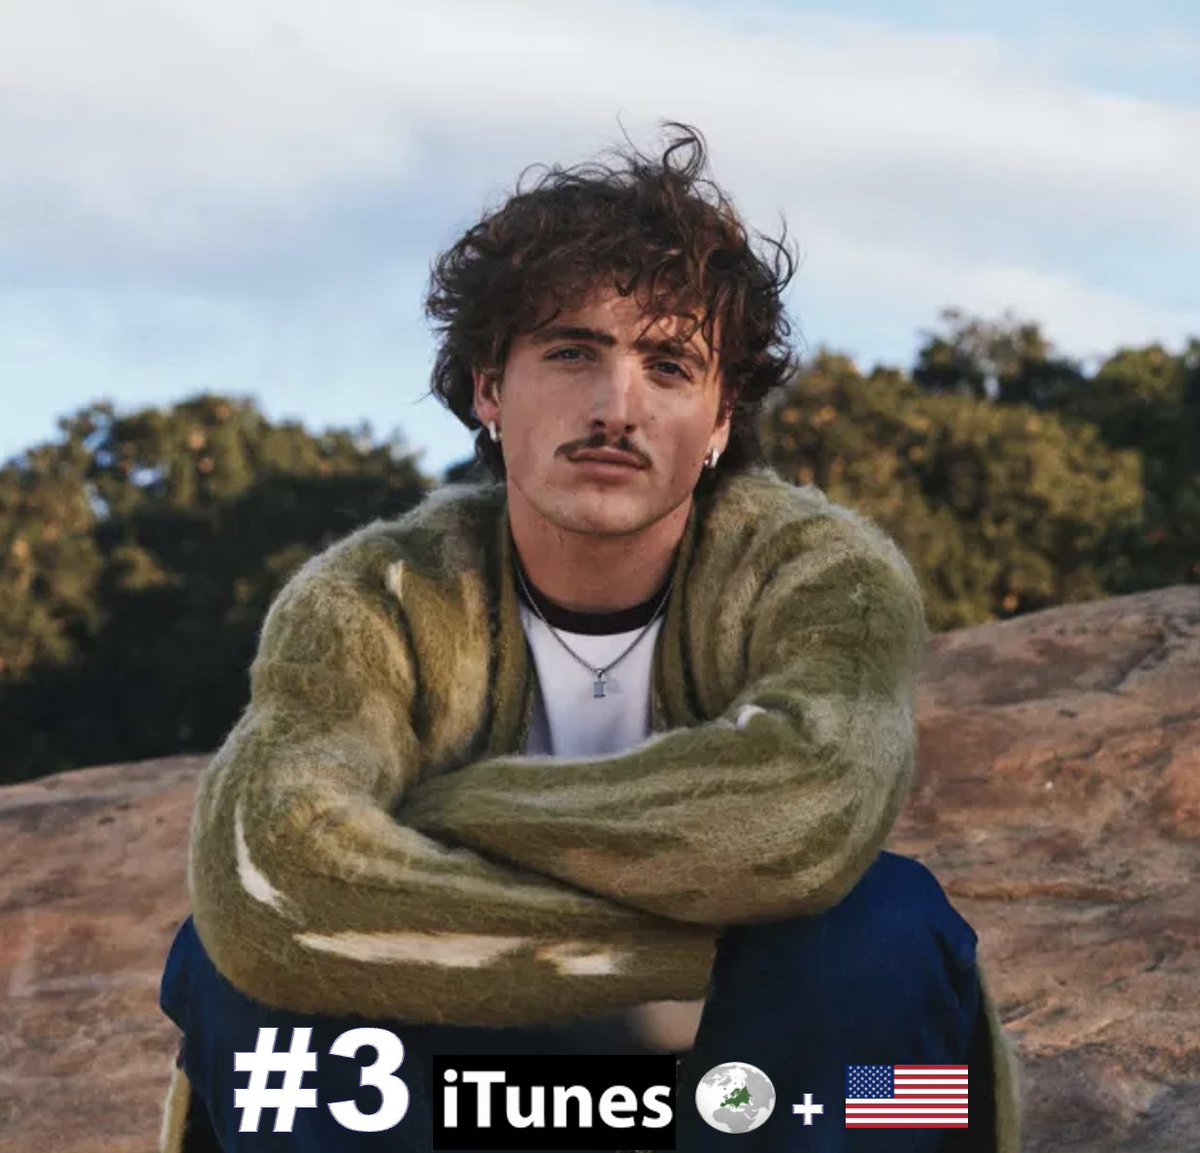 #BensonBoone's global smash hit 'Beautiful Things' tops the Worldwide iTunes song chart for an 18th non consecutive day day and returns to #1 on Apple Music Europe for a 65th day! 💪1⃣🌎🎵✖️1⃣8⃣🕛➕📈1⃣🔙🍎🎼🇪🇺✖️6⃣5⃣🕛🔥👑🧡

'Beautiful Things' holds at #3 on the European iTunes